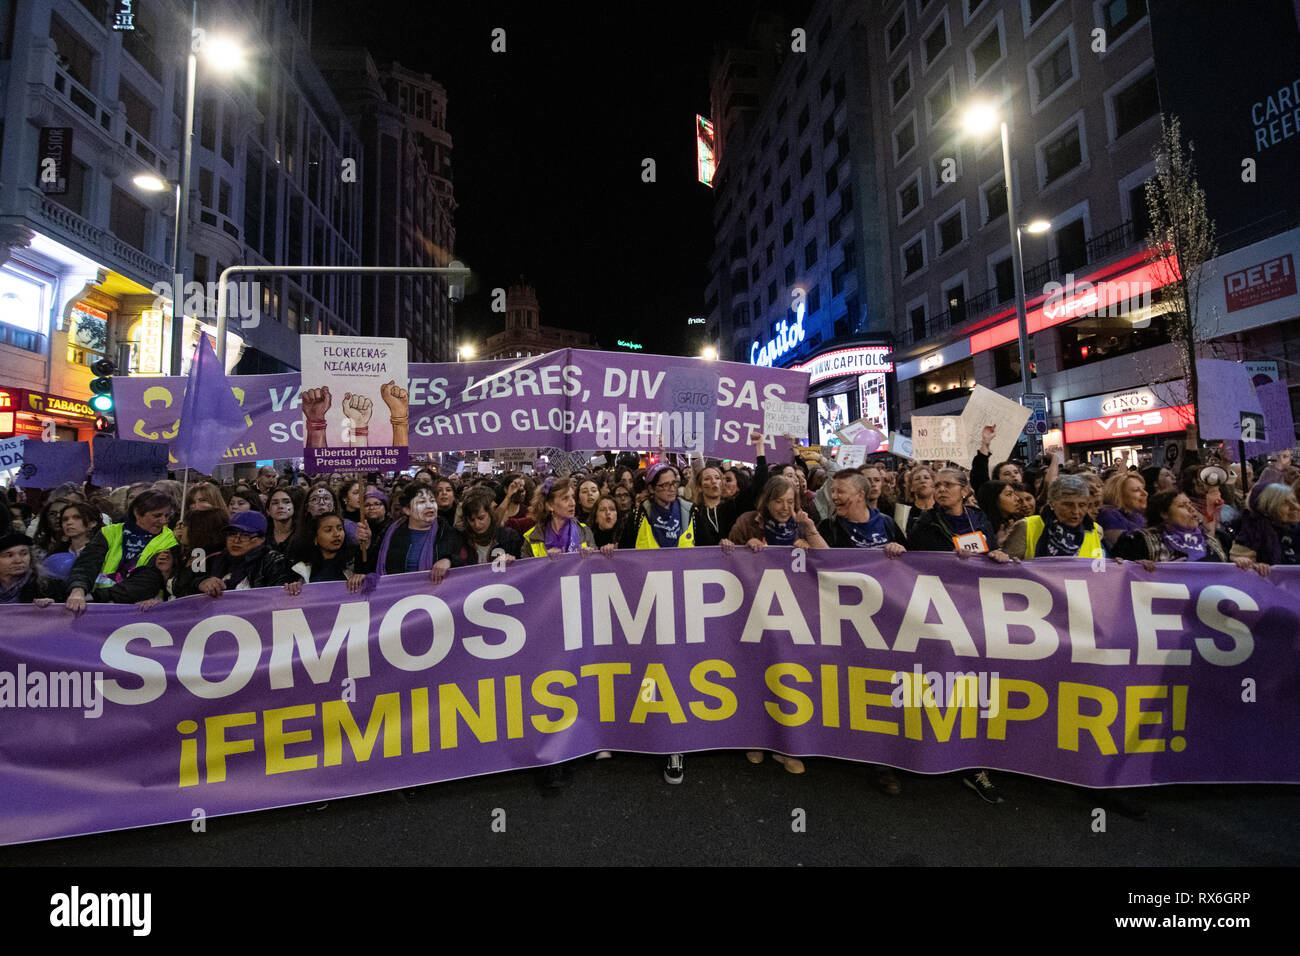 Madrid, Spain. 8th March, 2019. Demonstrator carrying the main banner of the demonstration with the moto 'We are unstoppable, feminist always' during the demonstration held in Madrid during the celebrations of the International Women's Day. Credit:  Valentin Sama-Rojo/Alamy Live News. Stock Photo